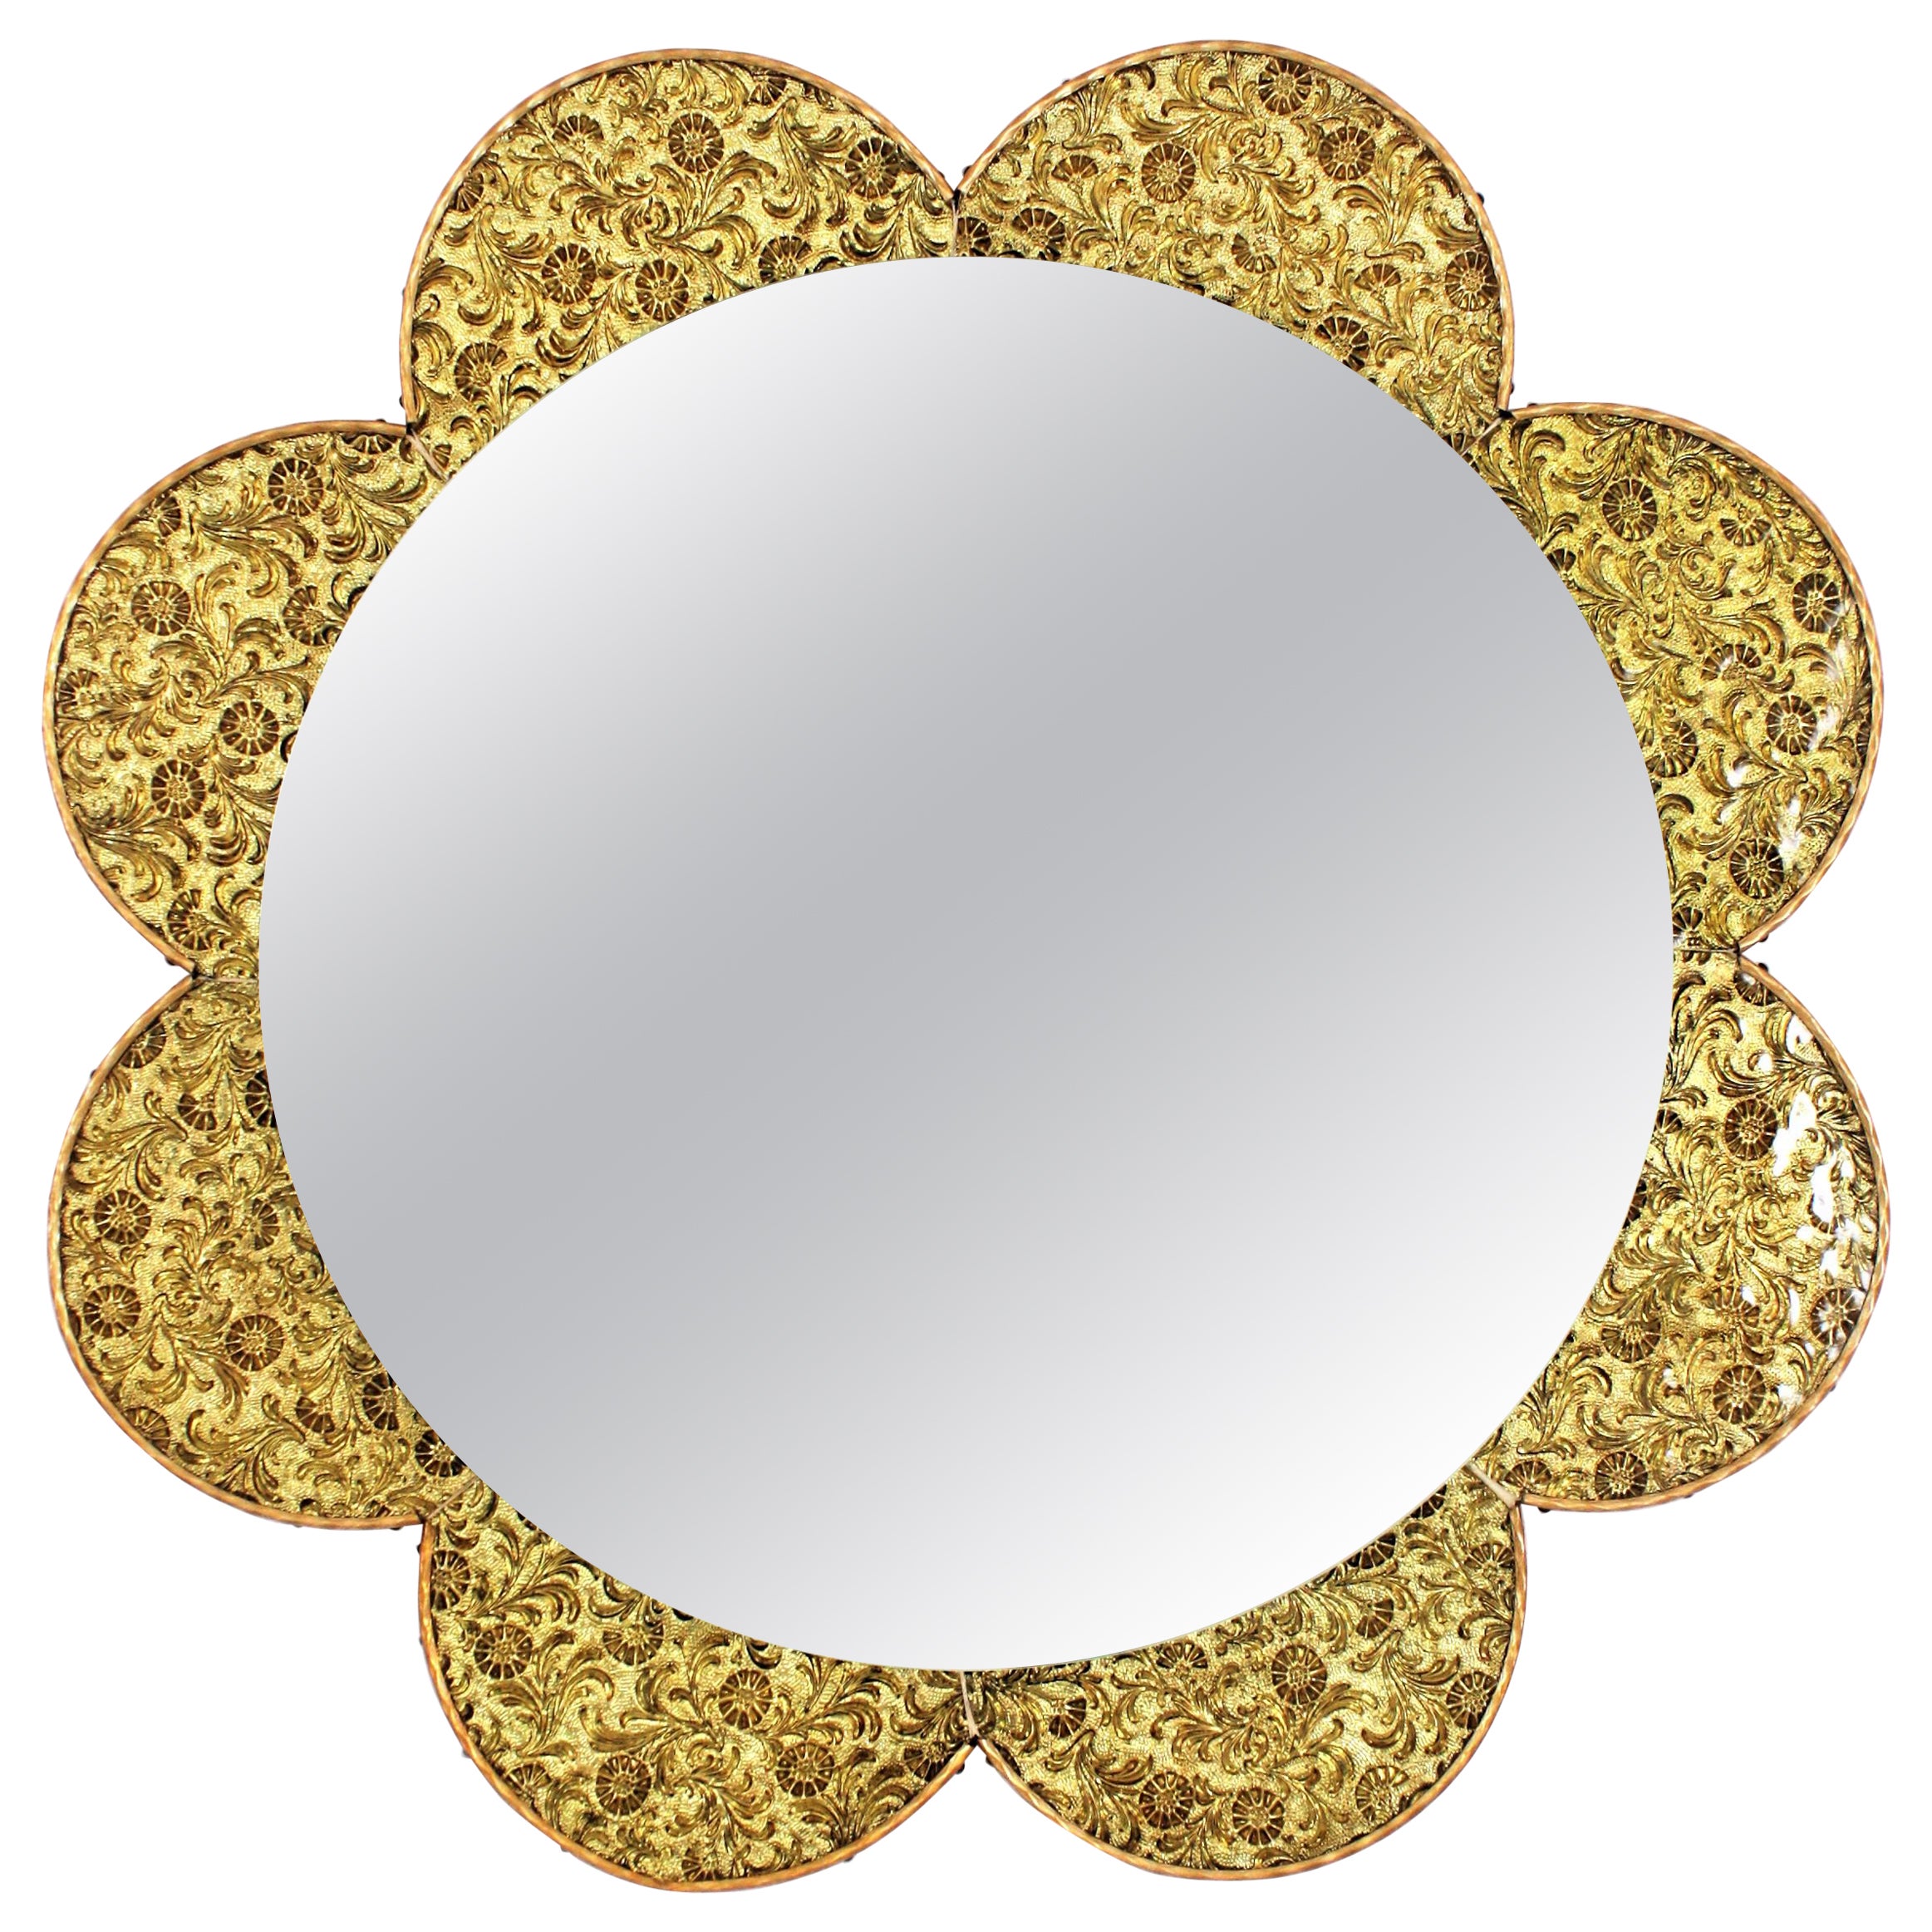 Flower Shaped Mirror with Golden Glass Petals For Sale